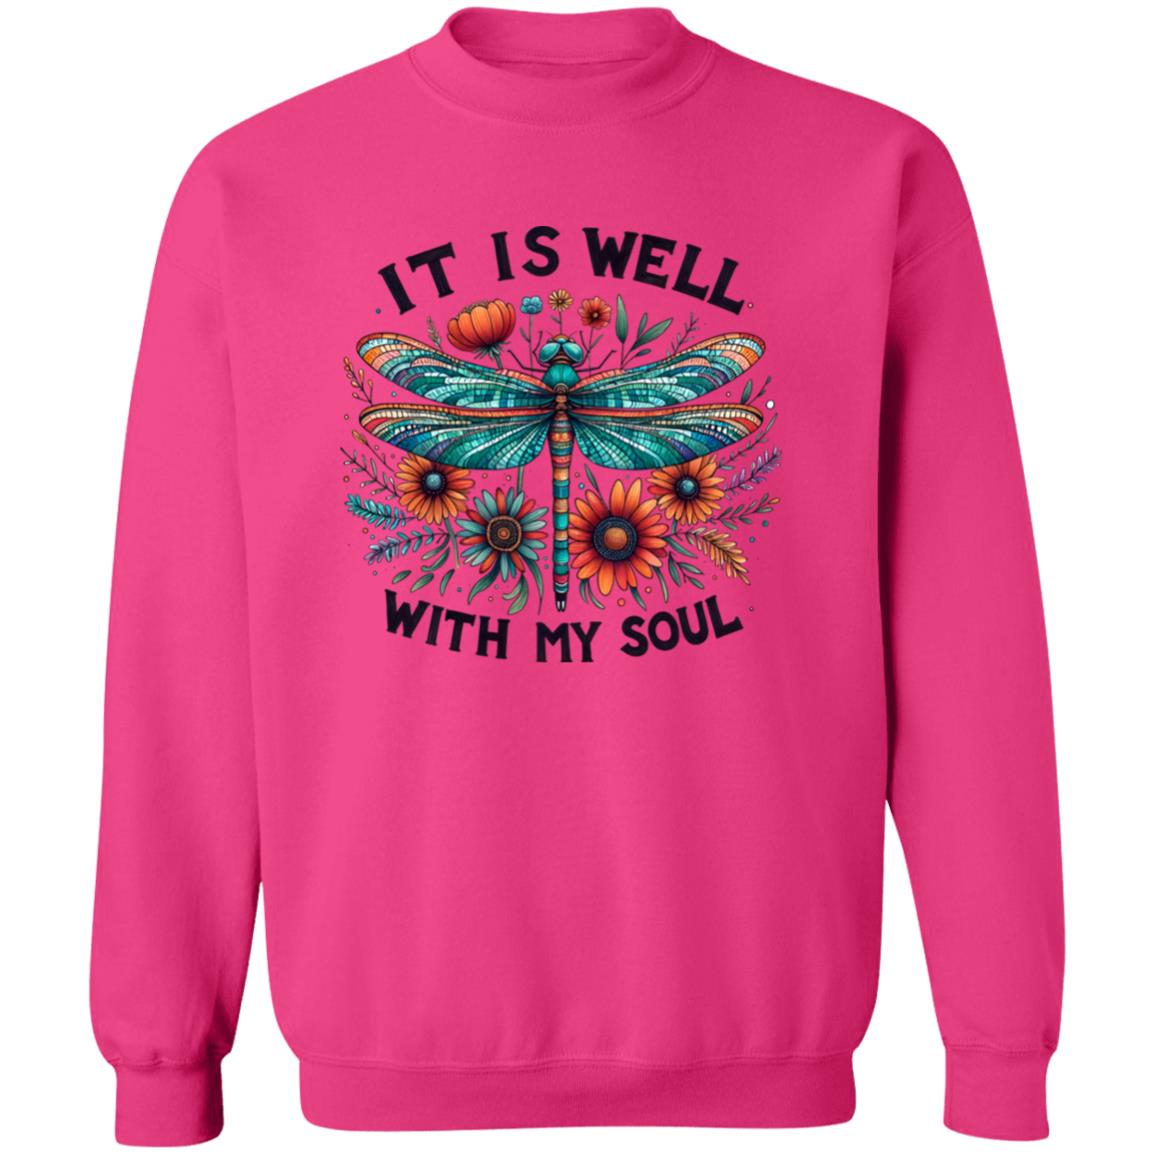 It Is Well With My Soul With Dragonfly Sweatshirt